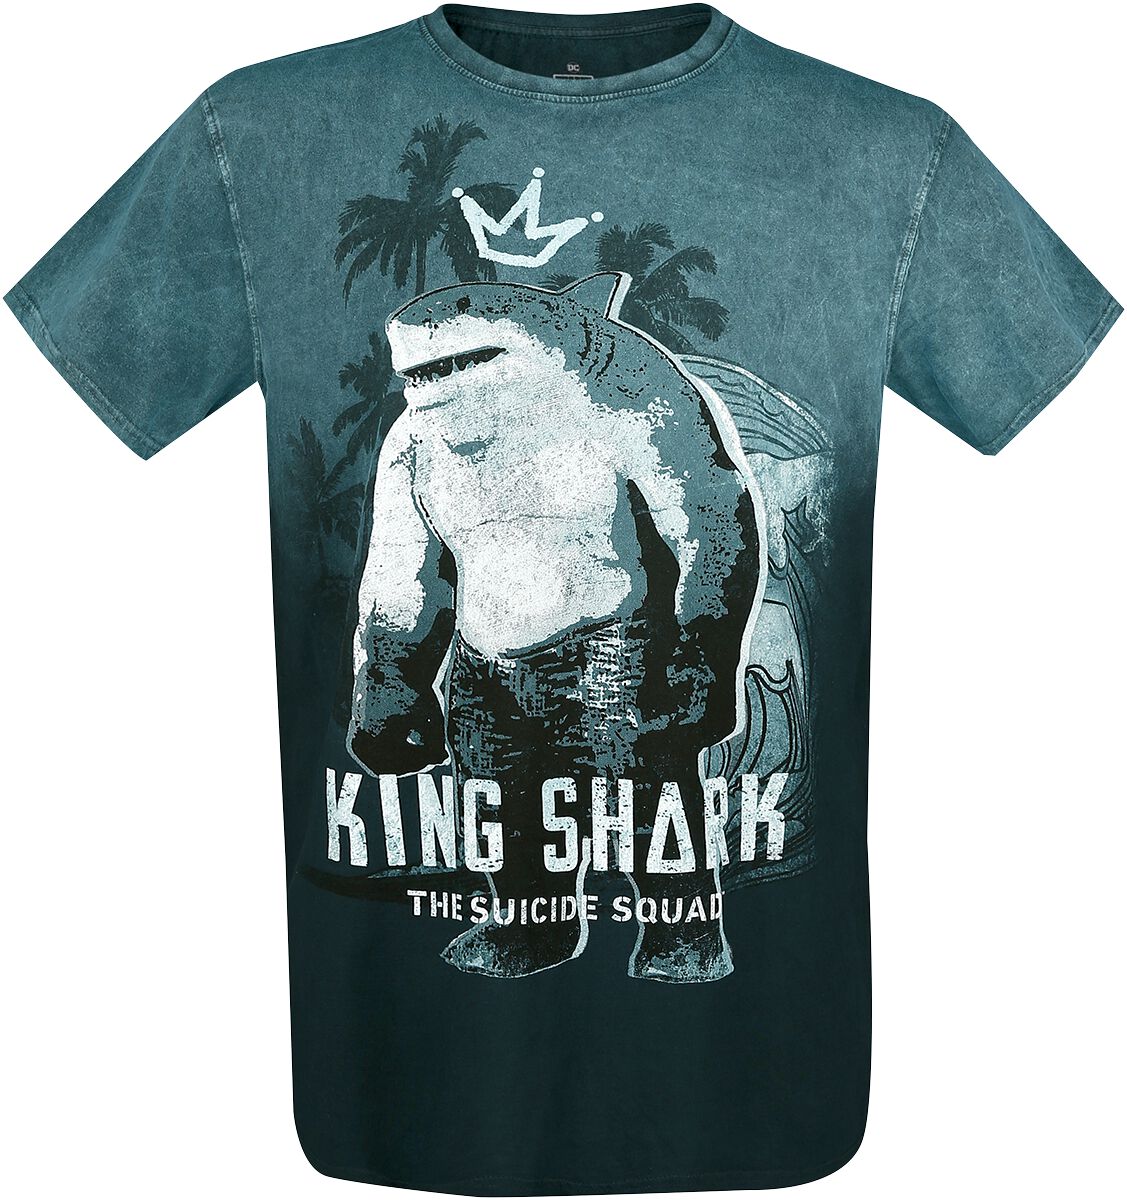 Suicide Squad 2 - King Shark T-Shirt turquoise